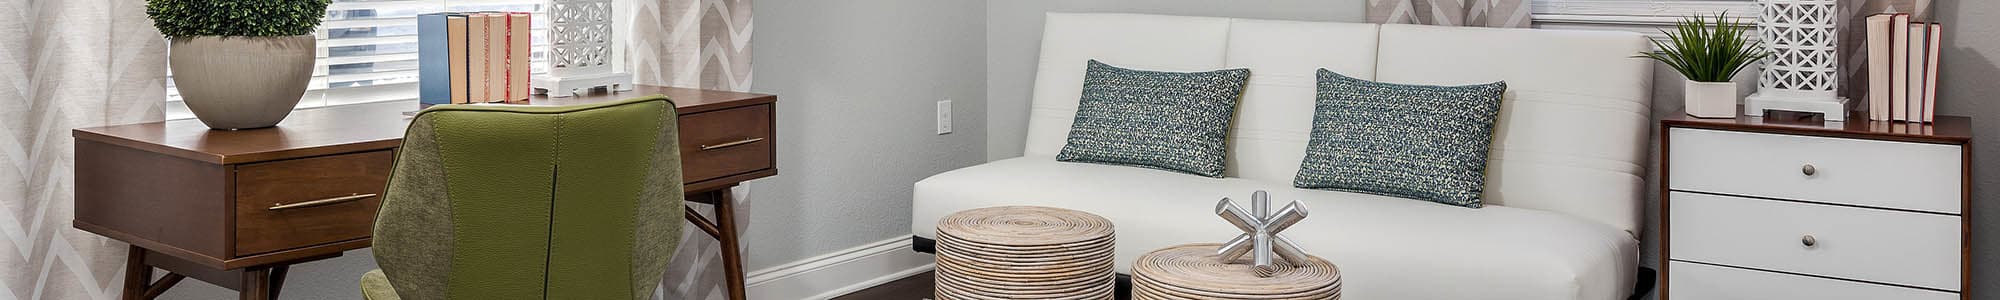 Schedule a tour to view our apartments in Auburn Hills, MI